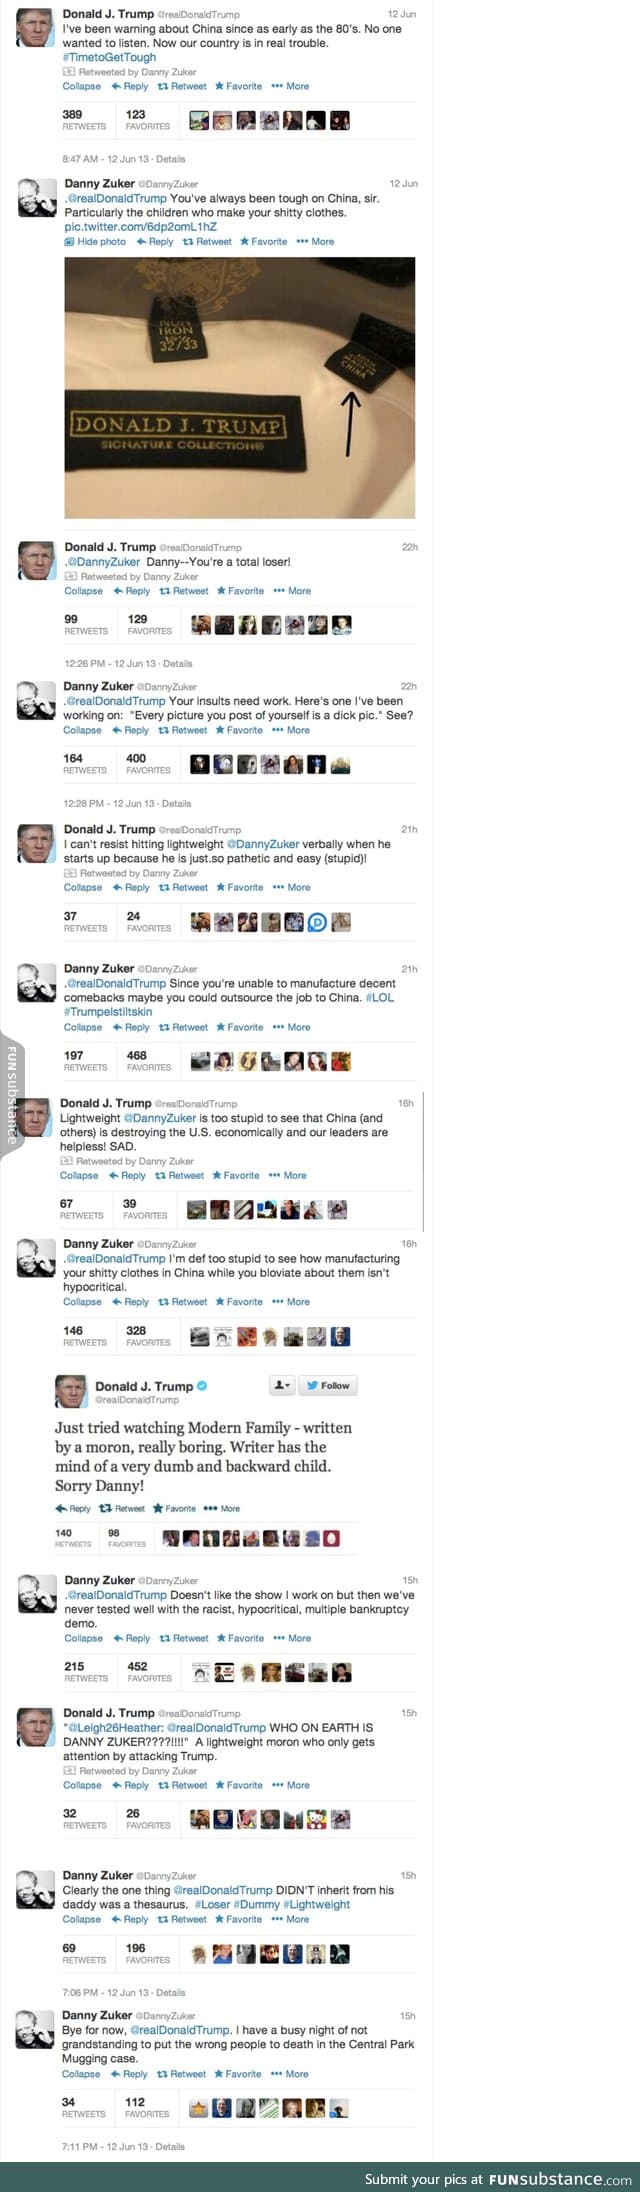 Donald Trump got in a Twitter argument with a Modern Family writer